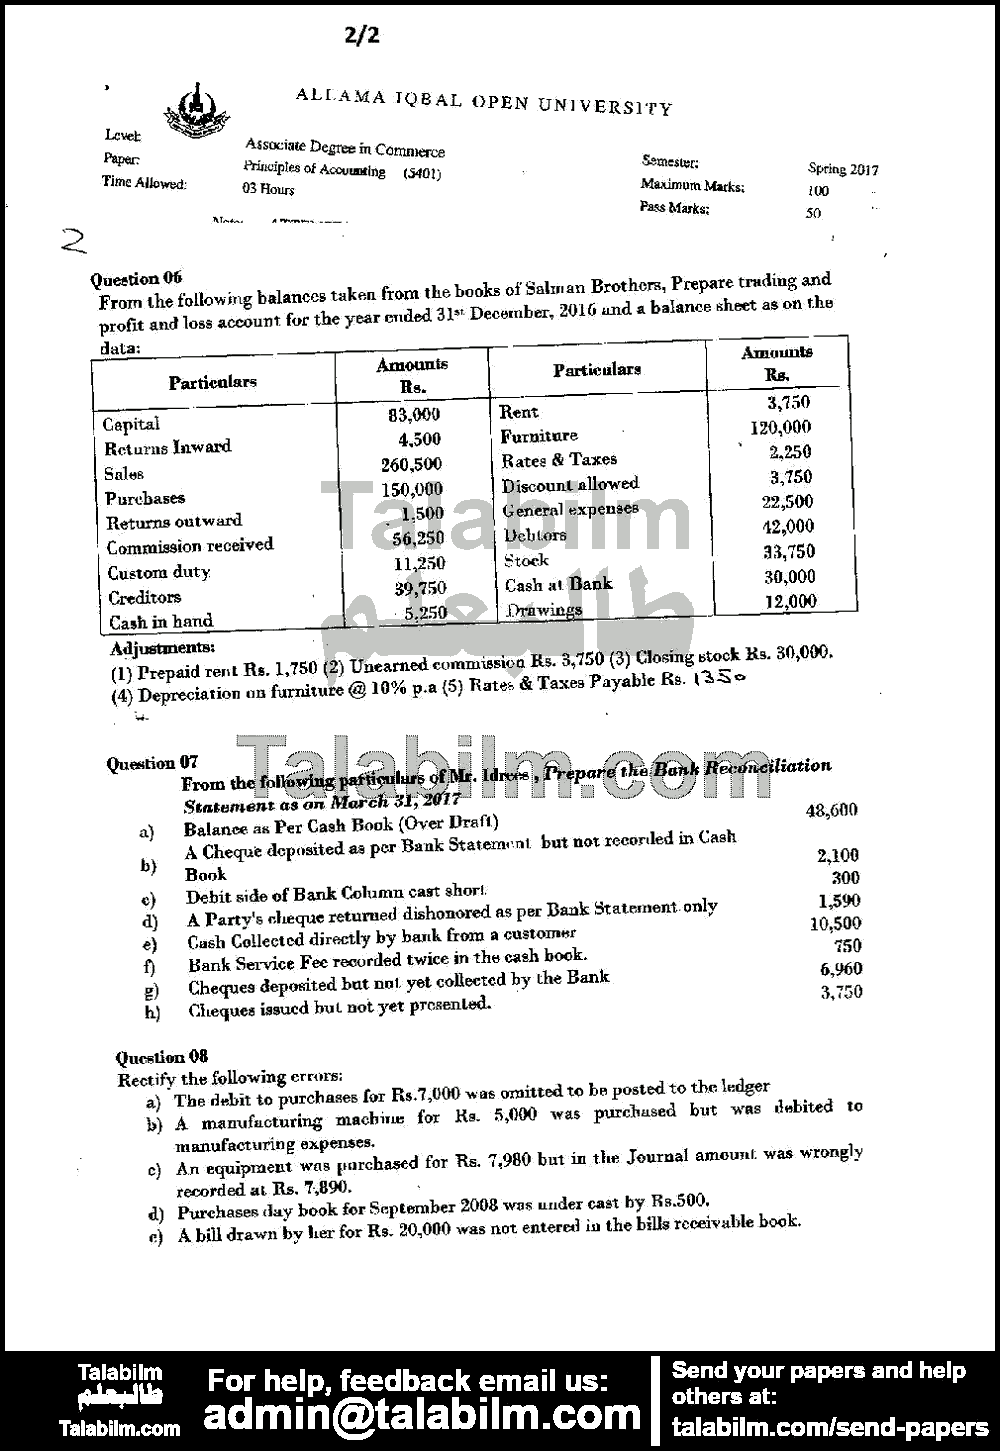 Principals of Accounting 5401 past paper for Spring 2017 Page No. 2